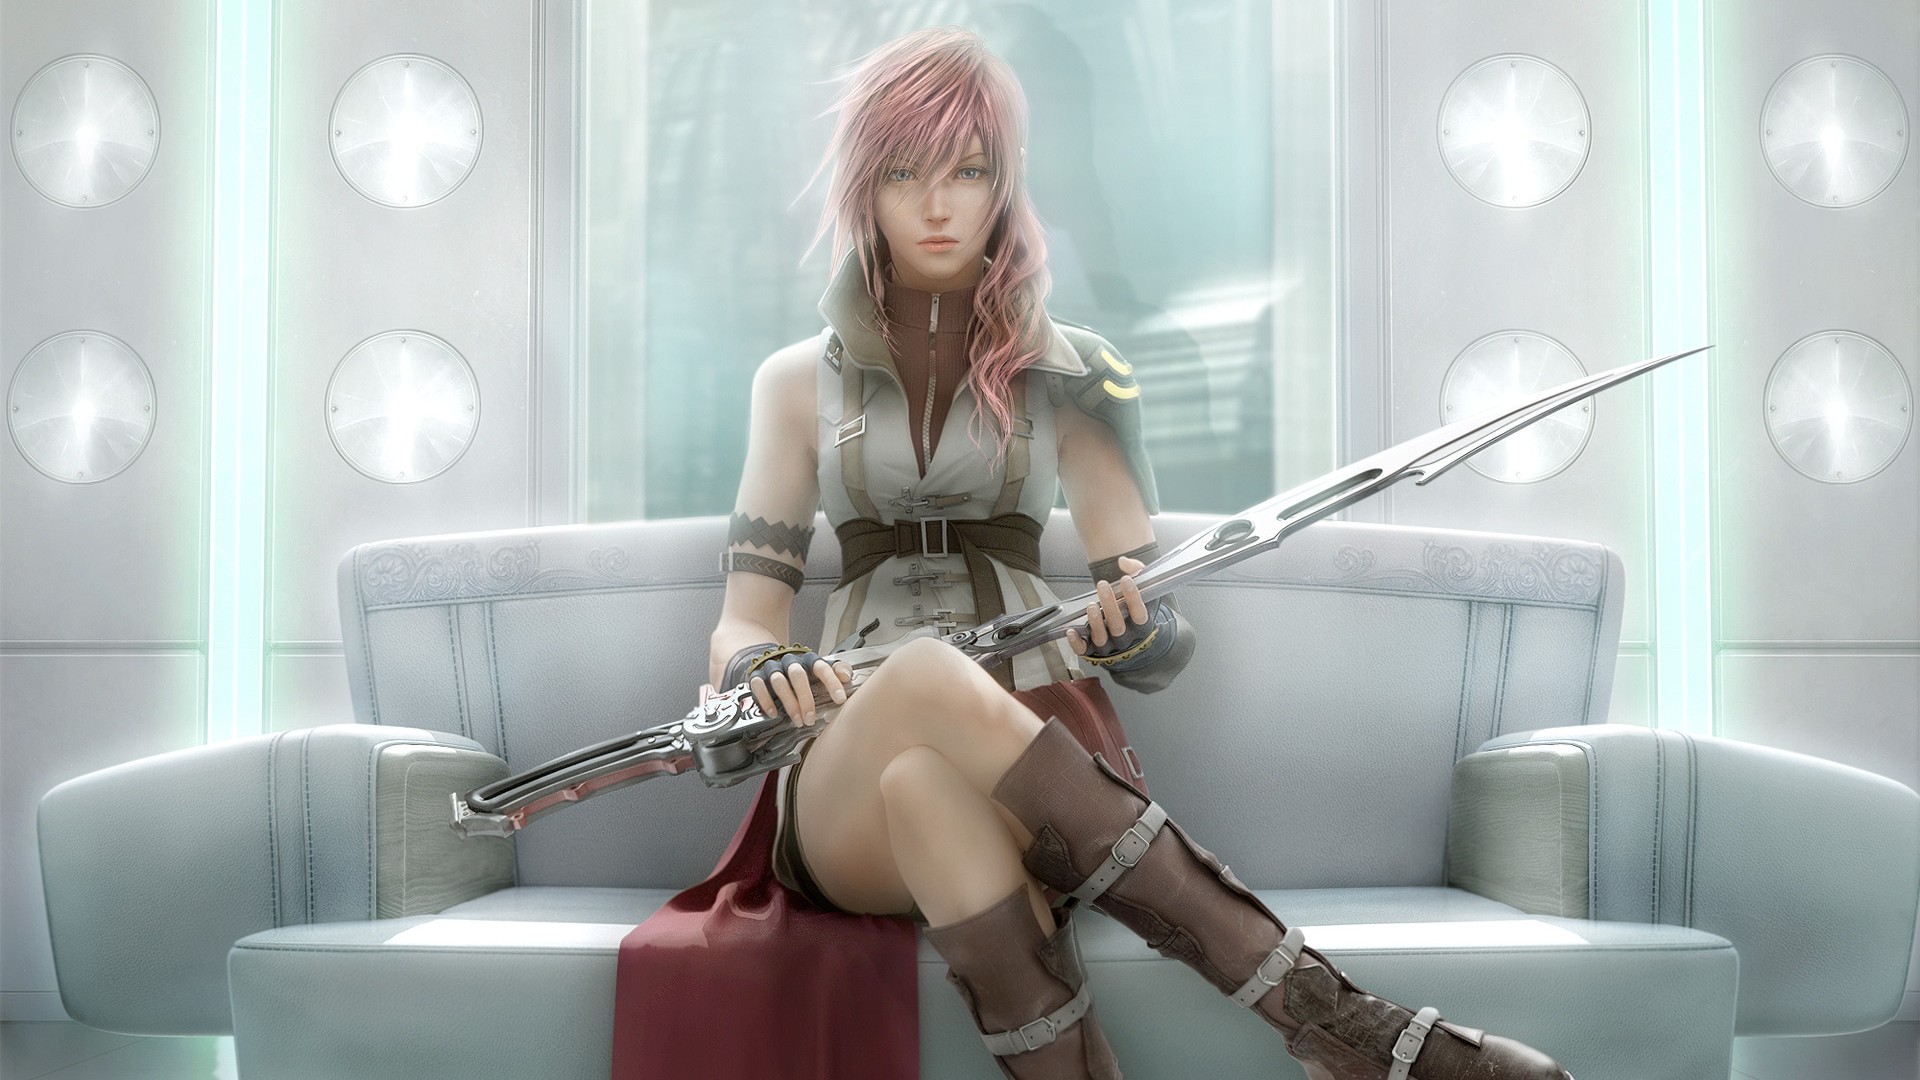 boots, Final Fantasy, video games, uniforms, gloves, indoors, Final Fantasy XIII, Claire Farron, 3D, swords, leather boots, girls with weapons - desktop wallpaper